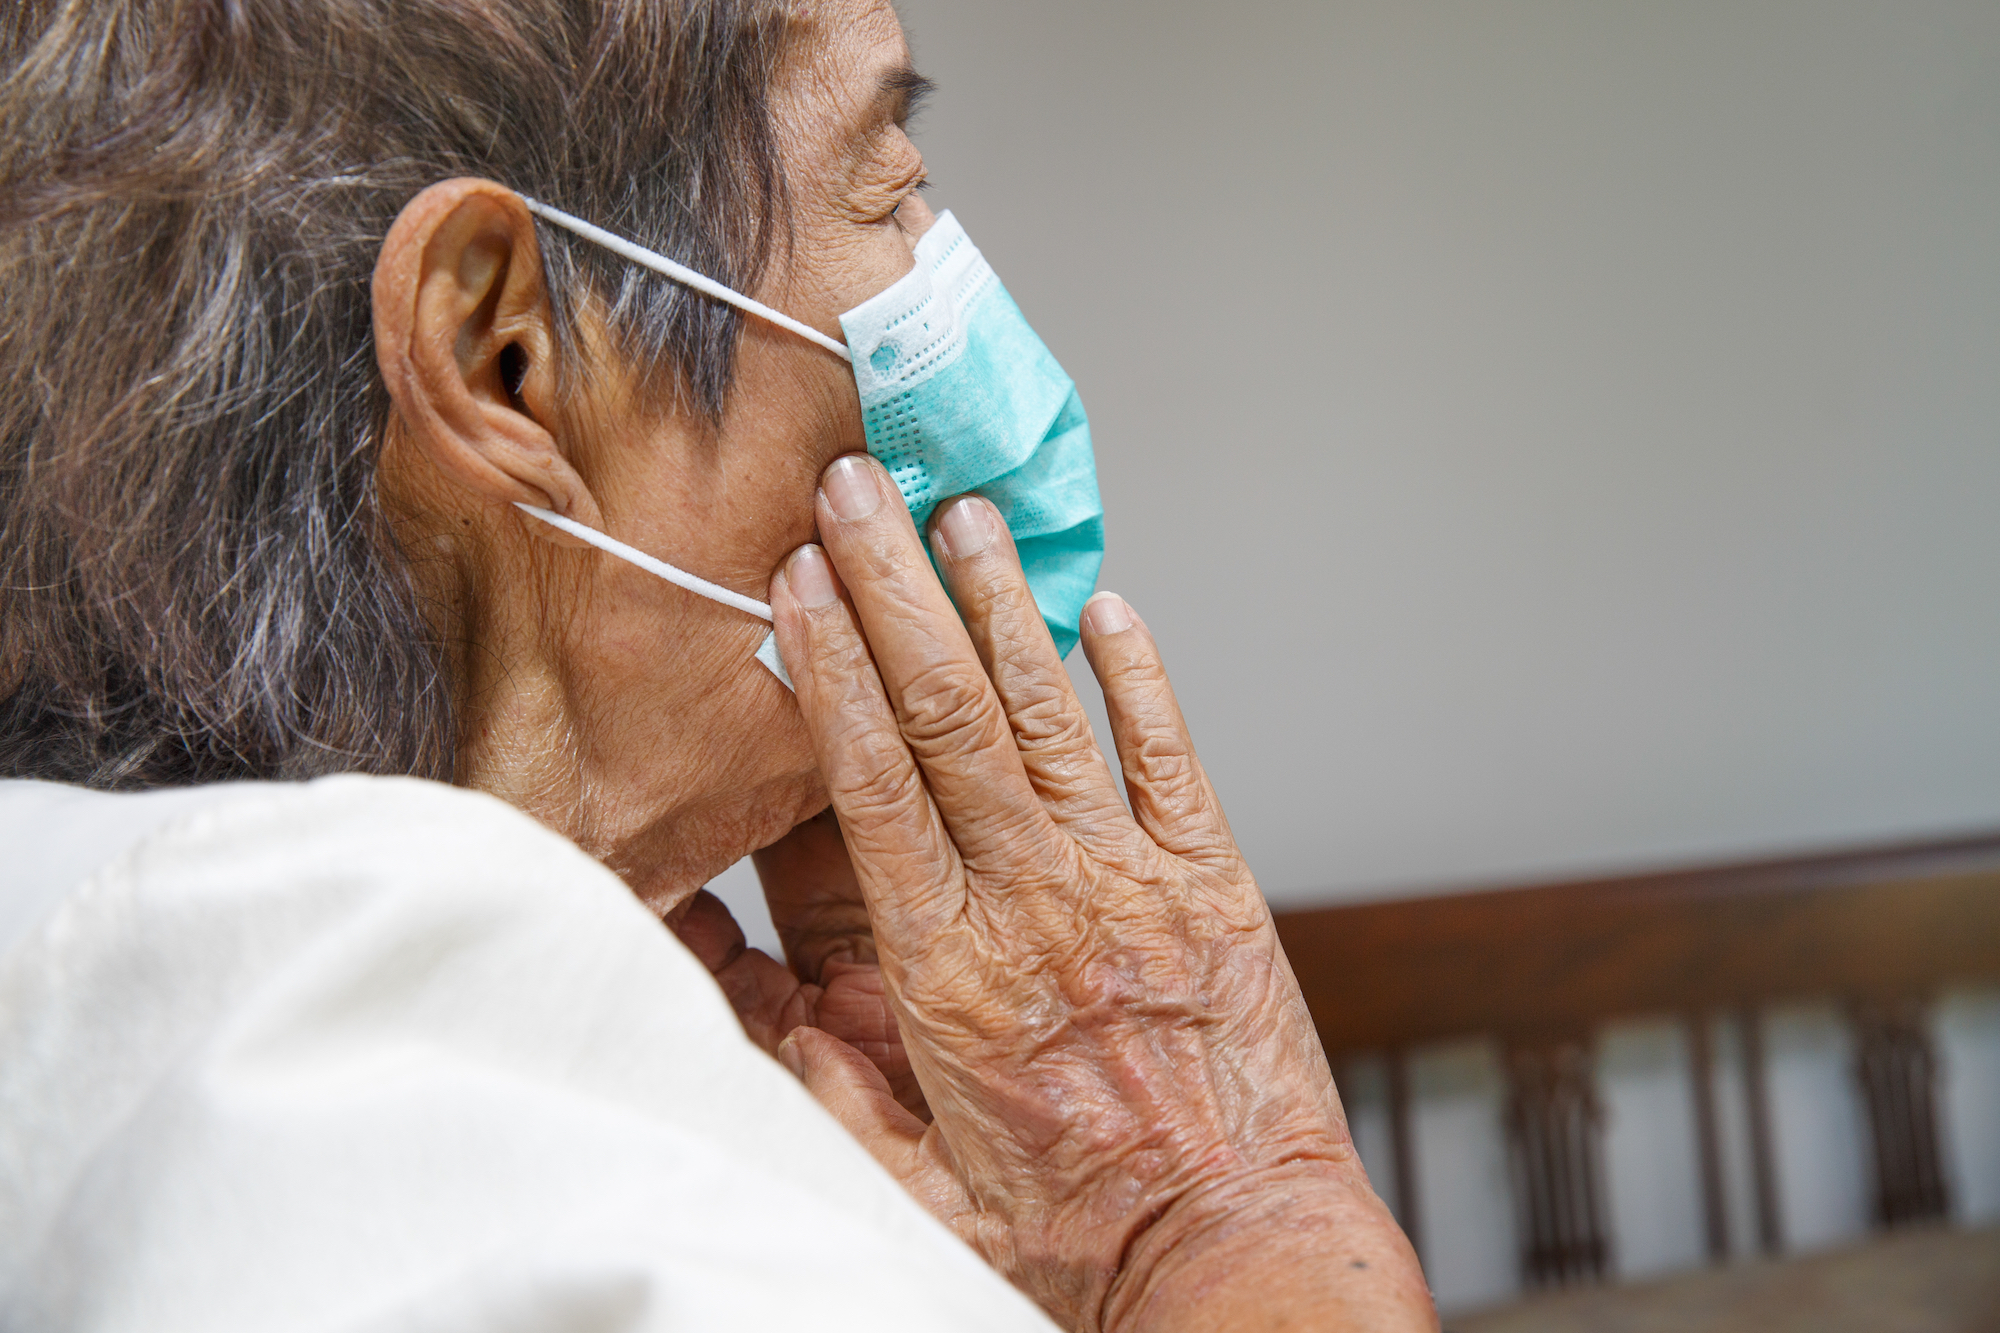 Nearly 300 seniors infected in most recent Covid-19 outbreak